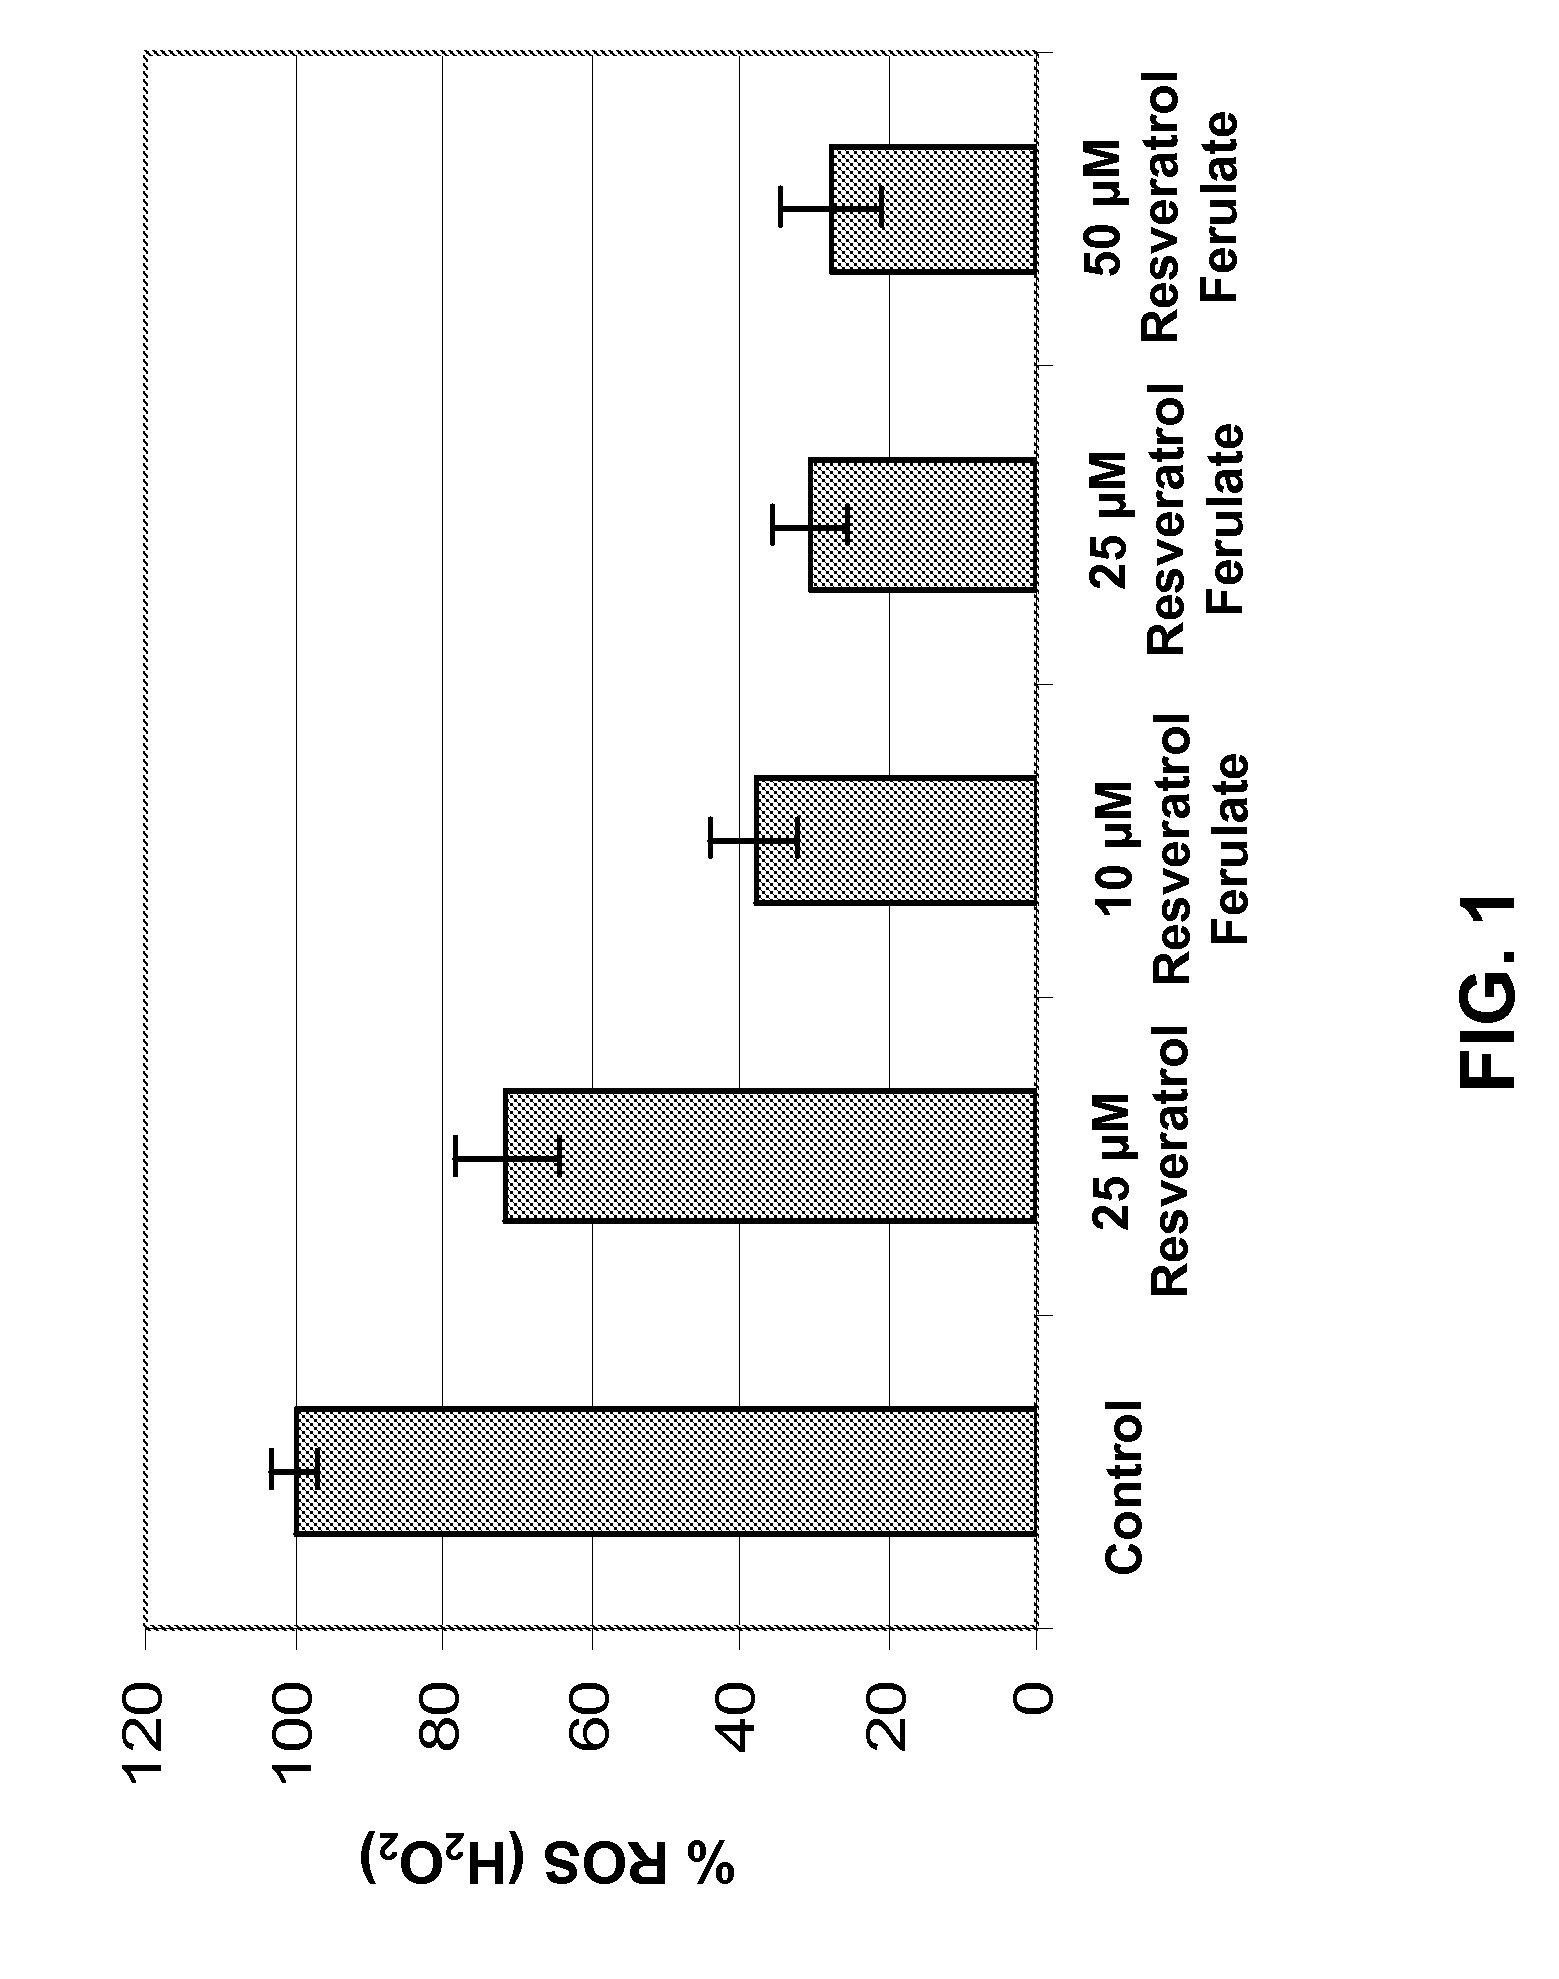 Resveratrol Ferulate Compounds, Compositions Containing The Compounds, And Methods Of Using The Same